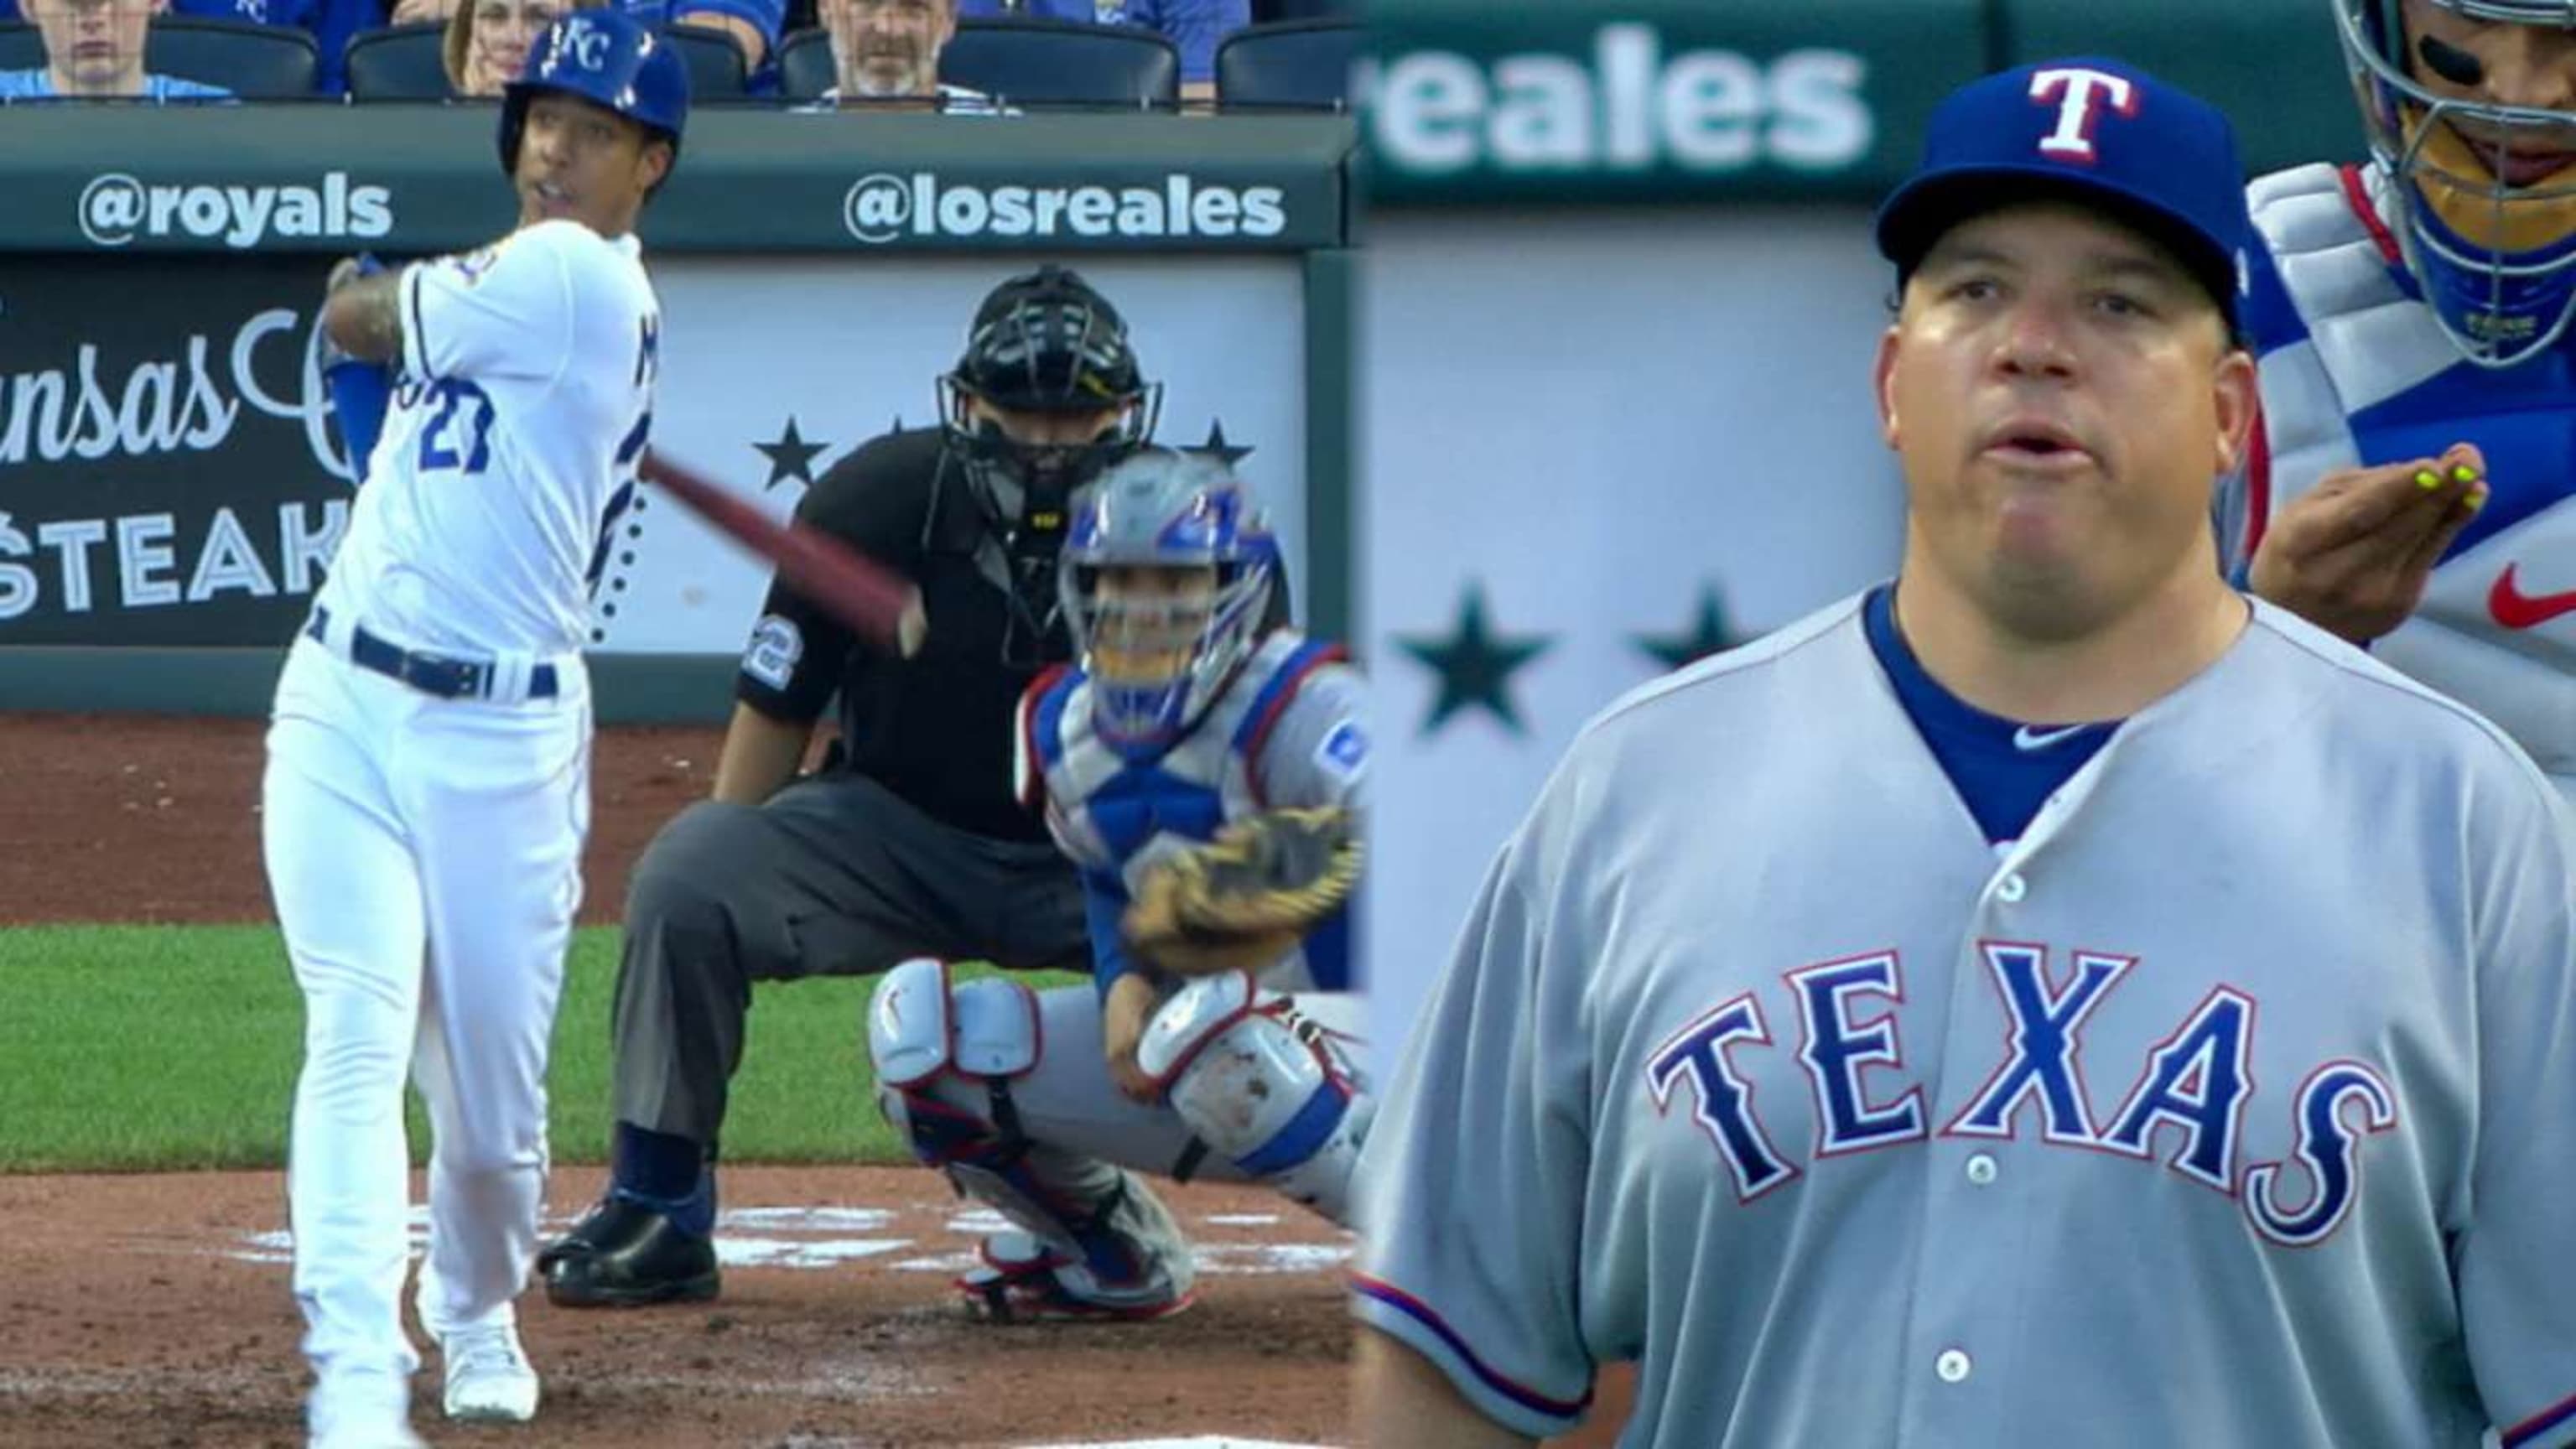 Bartolo Colon pitched against Cody Bellinger 17 years after facing